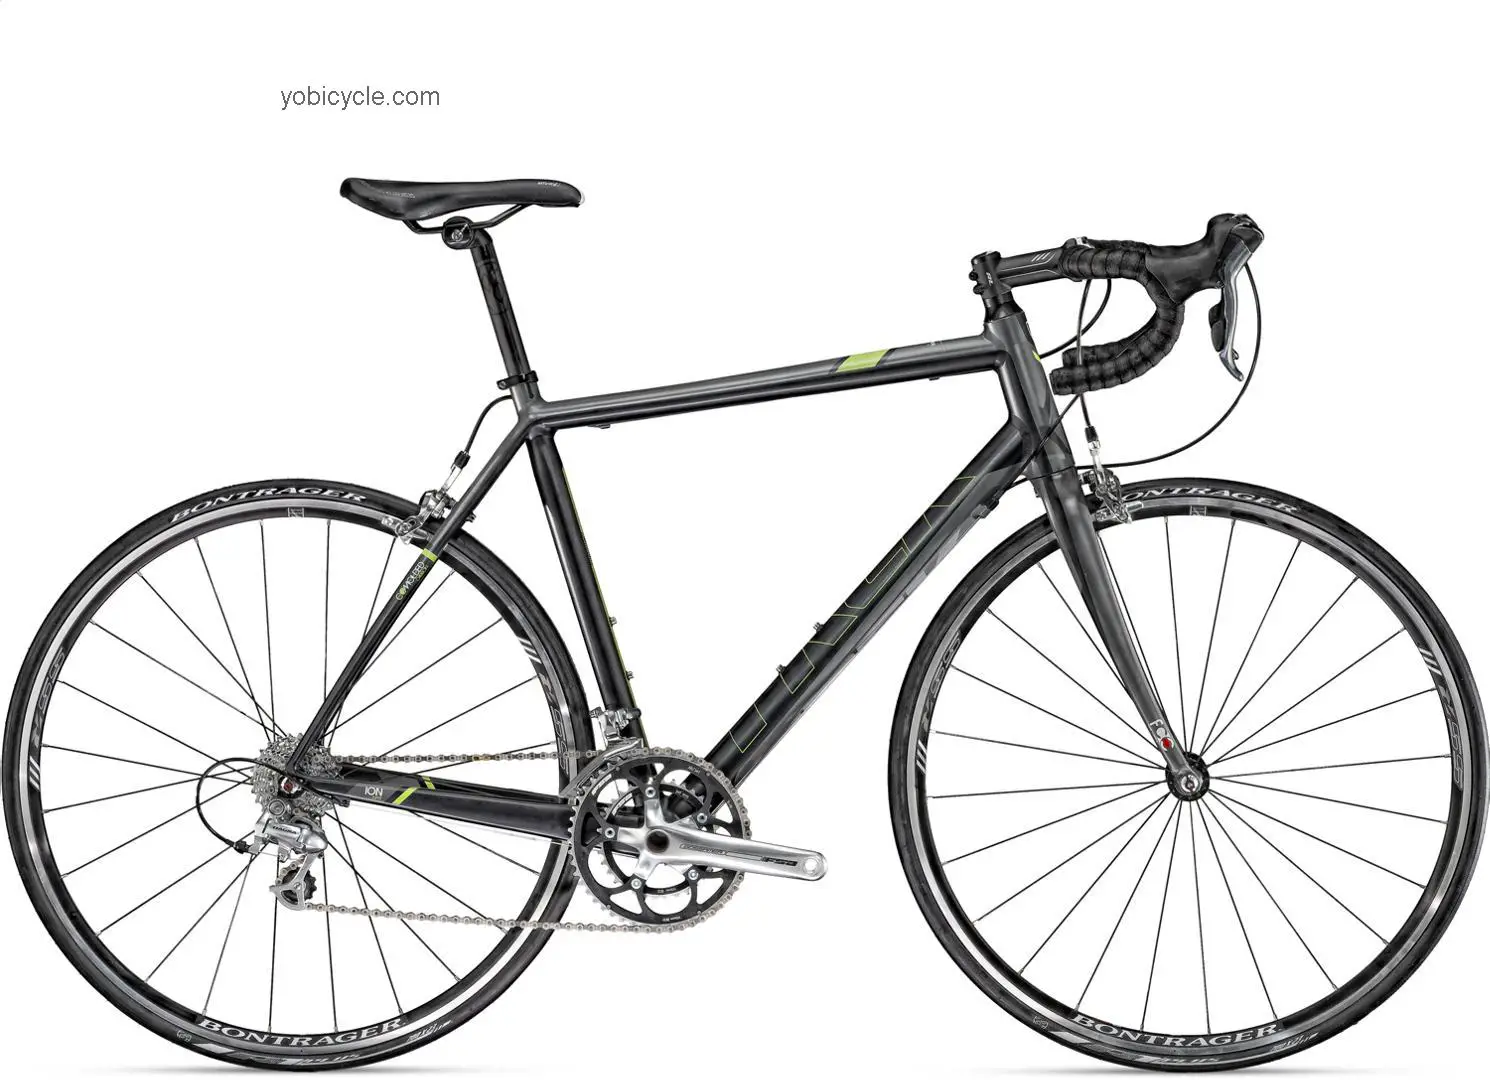 Trek Gary Fisher Ion Super 2011 comparison online with competitors